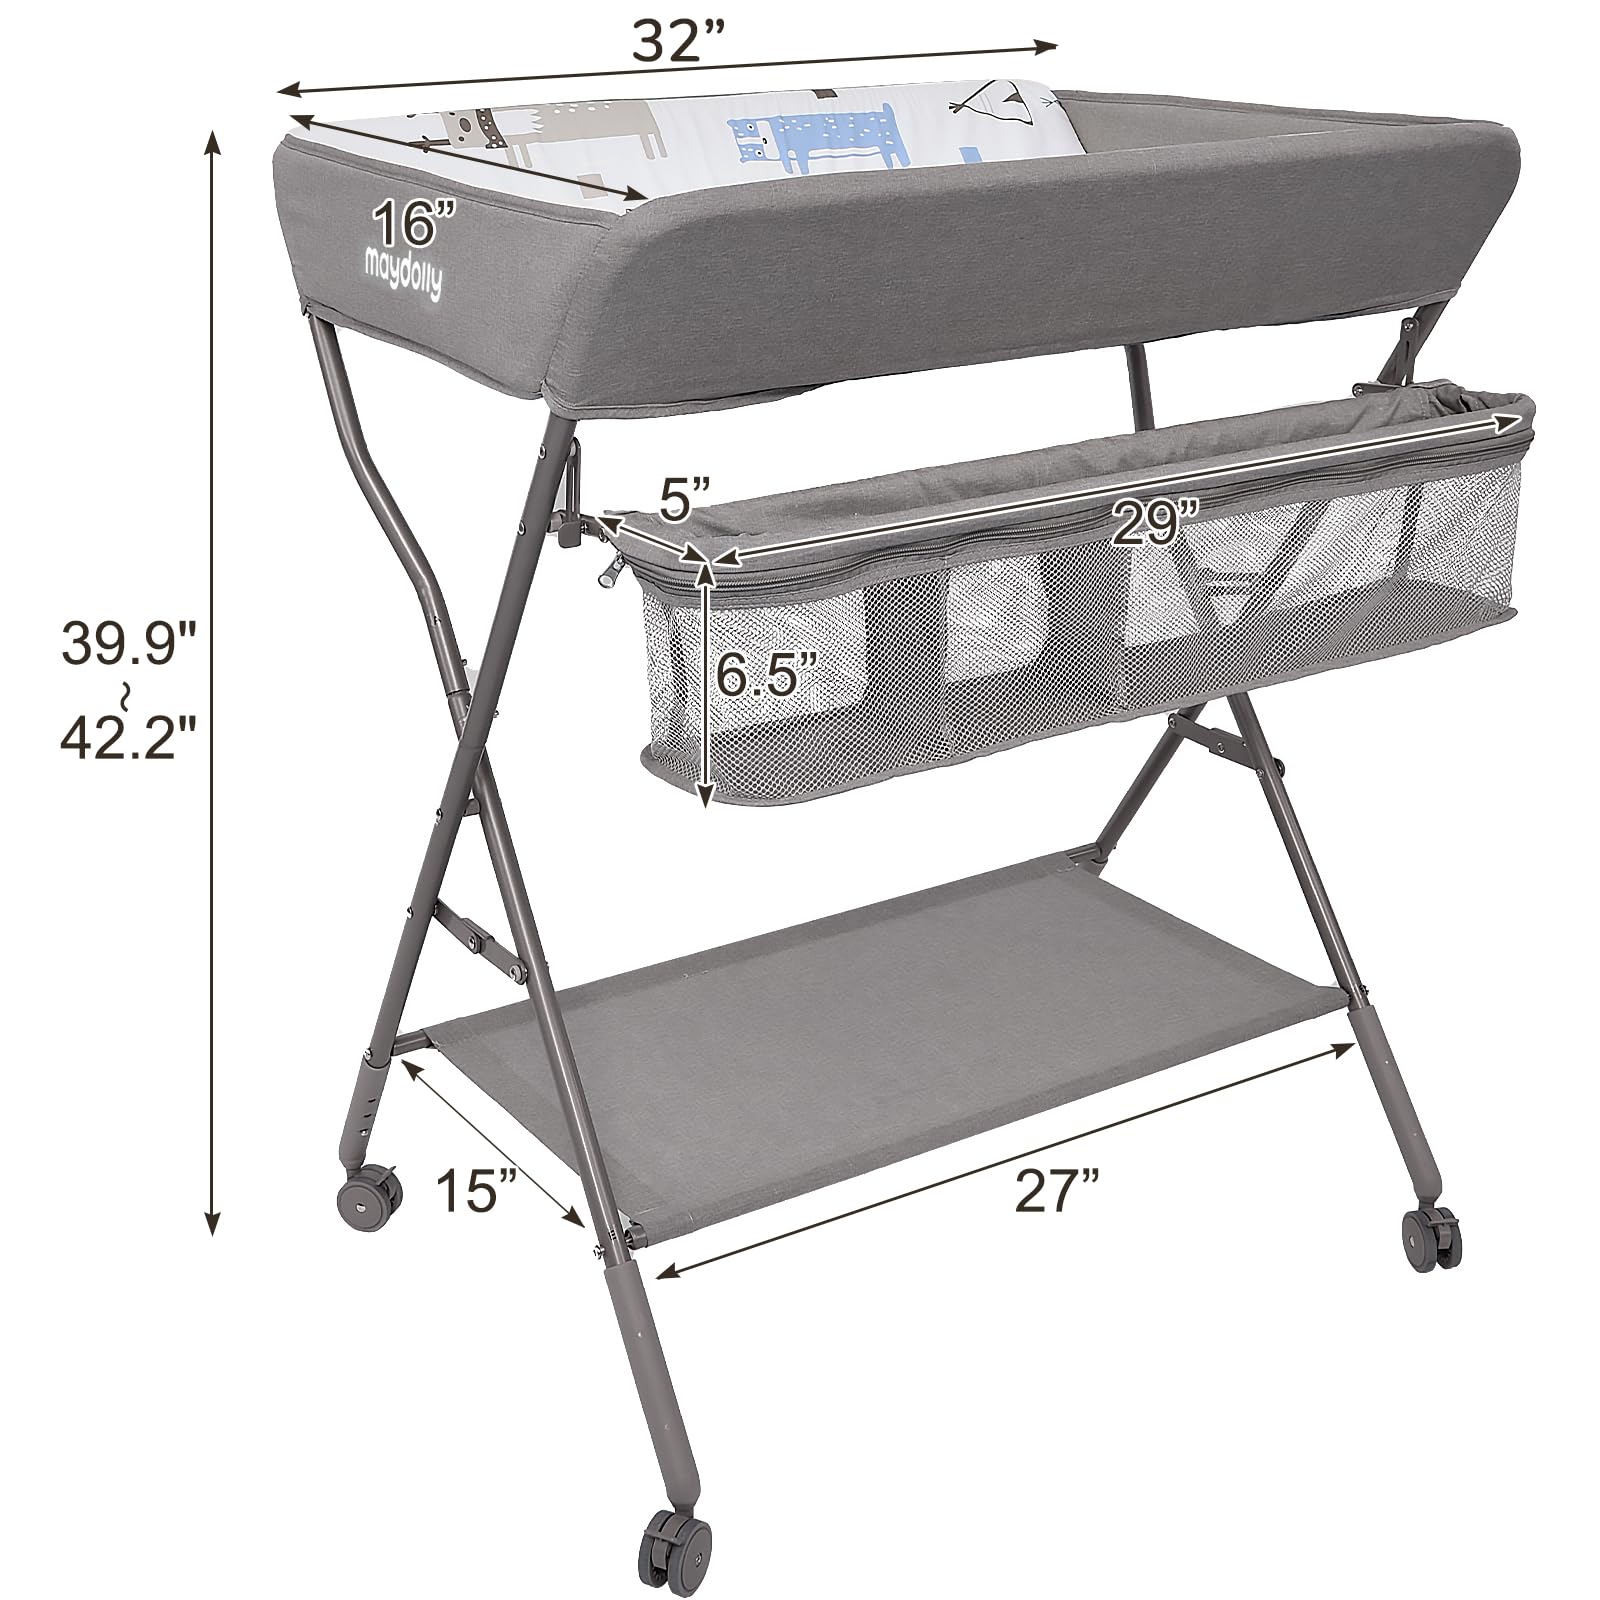 Baby Changing Table with Wheels, Maydolly Portable Adjustable Height Folding Diaper Station with Nursery Organizer & Storage Rack for Newborn Baby and Infant, Grey Pattern